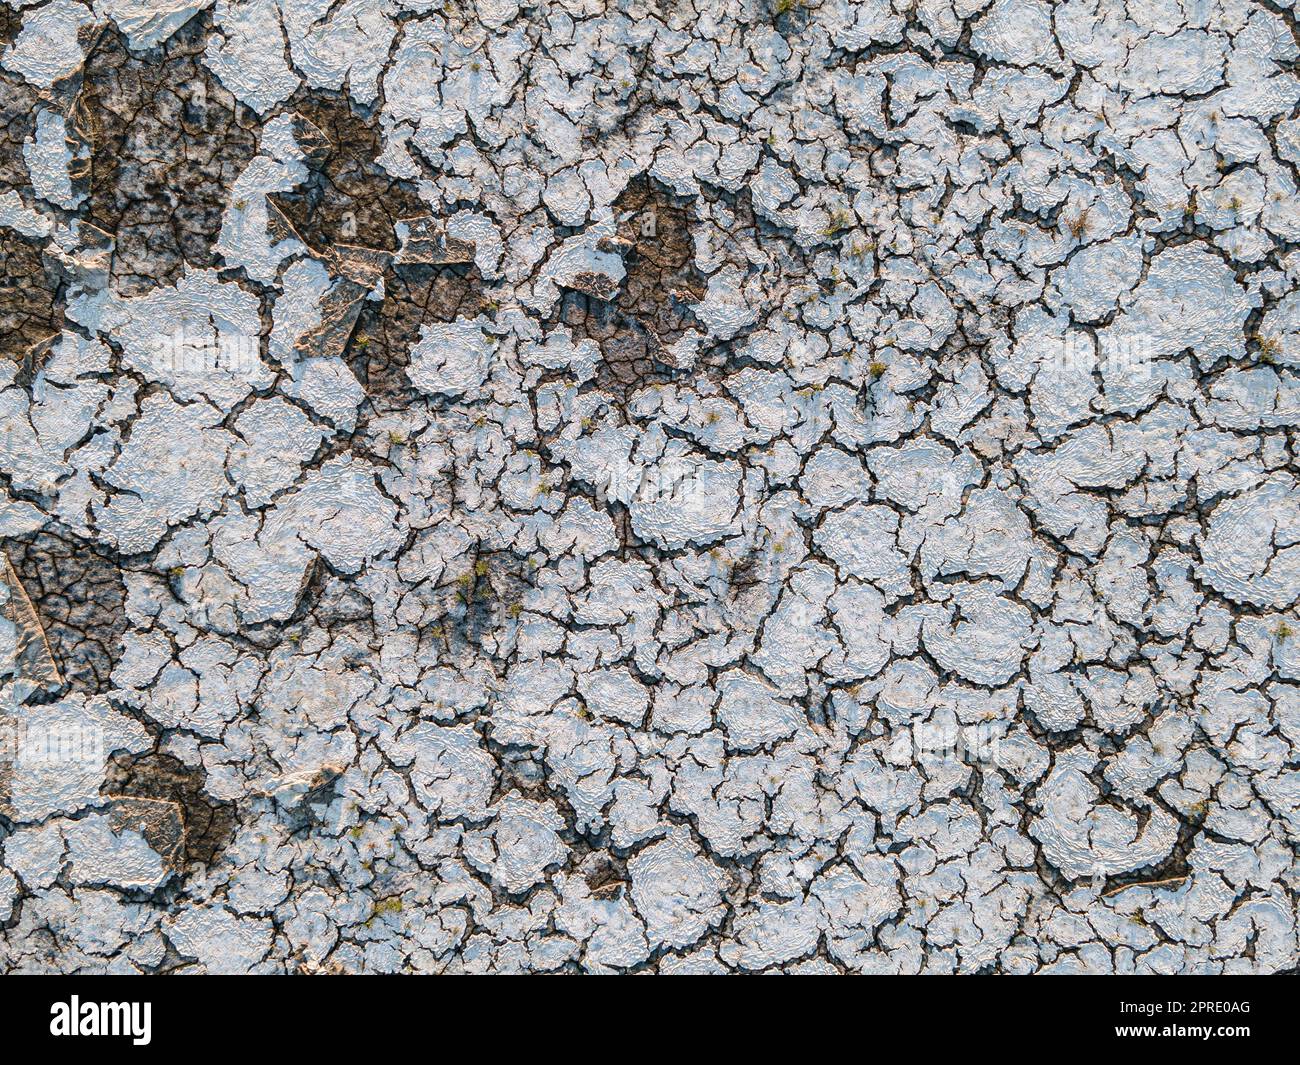 Geology.Dried-up riverbeds and lakes. Drought, global warming and climate change. Cracked dry earth and soil.Dry desert, drought season. Idea concept symbol disaster ecology in nature. Stock Photo